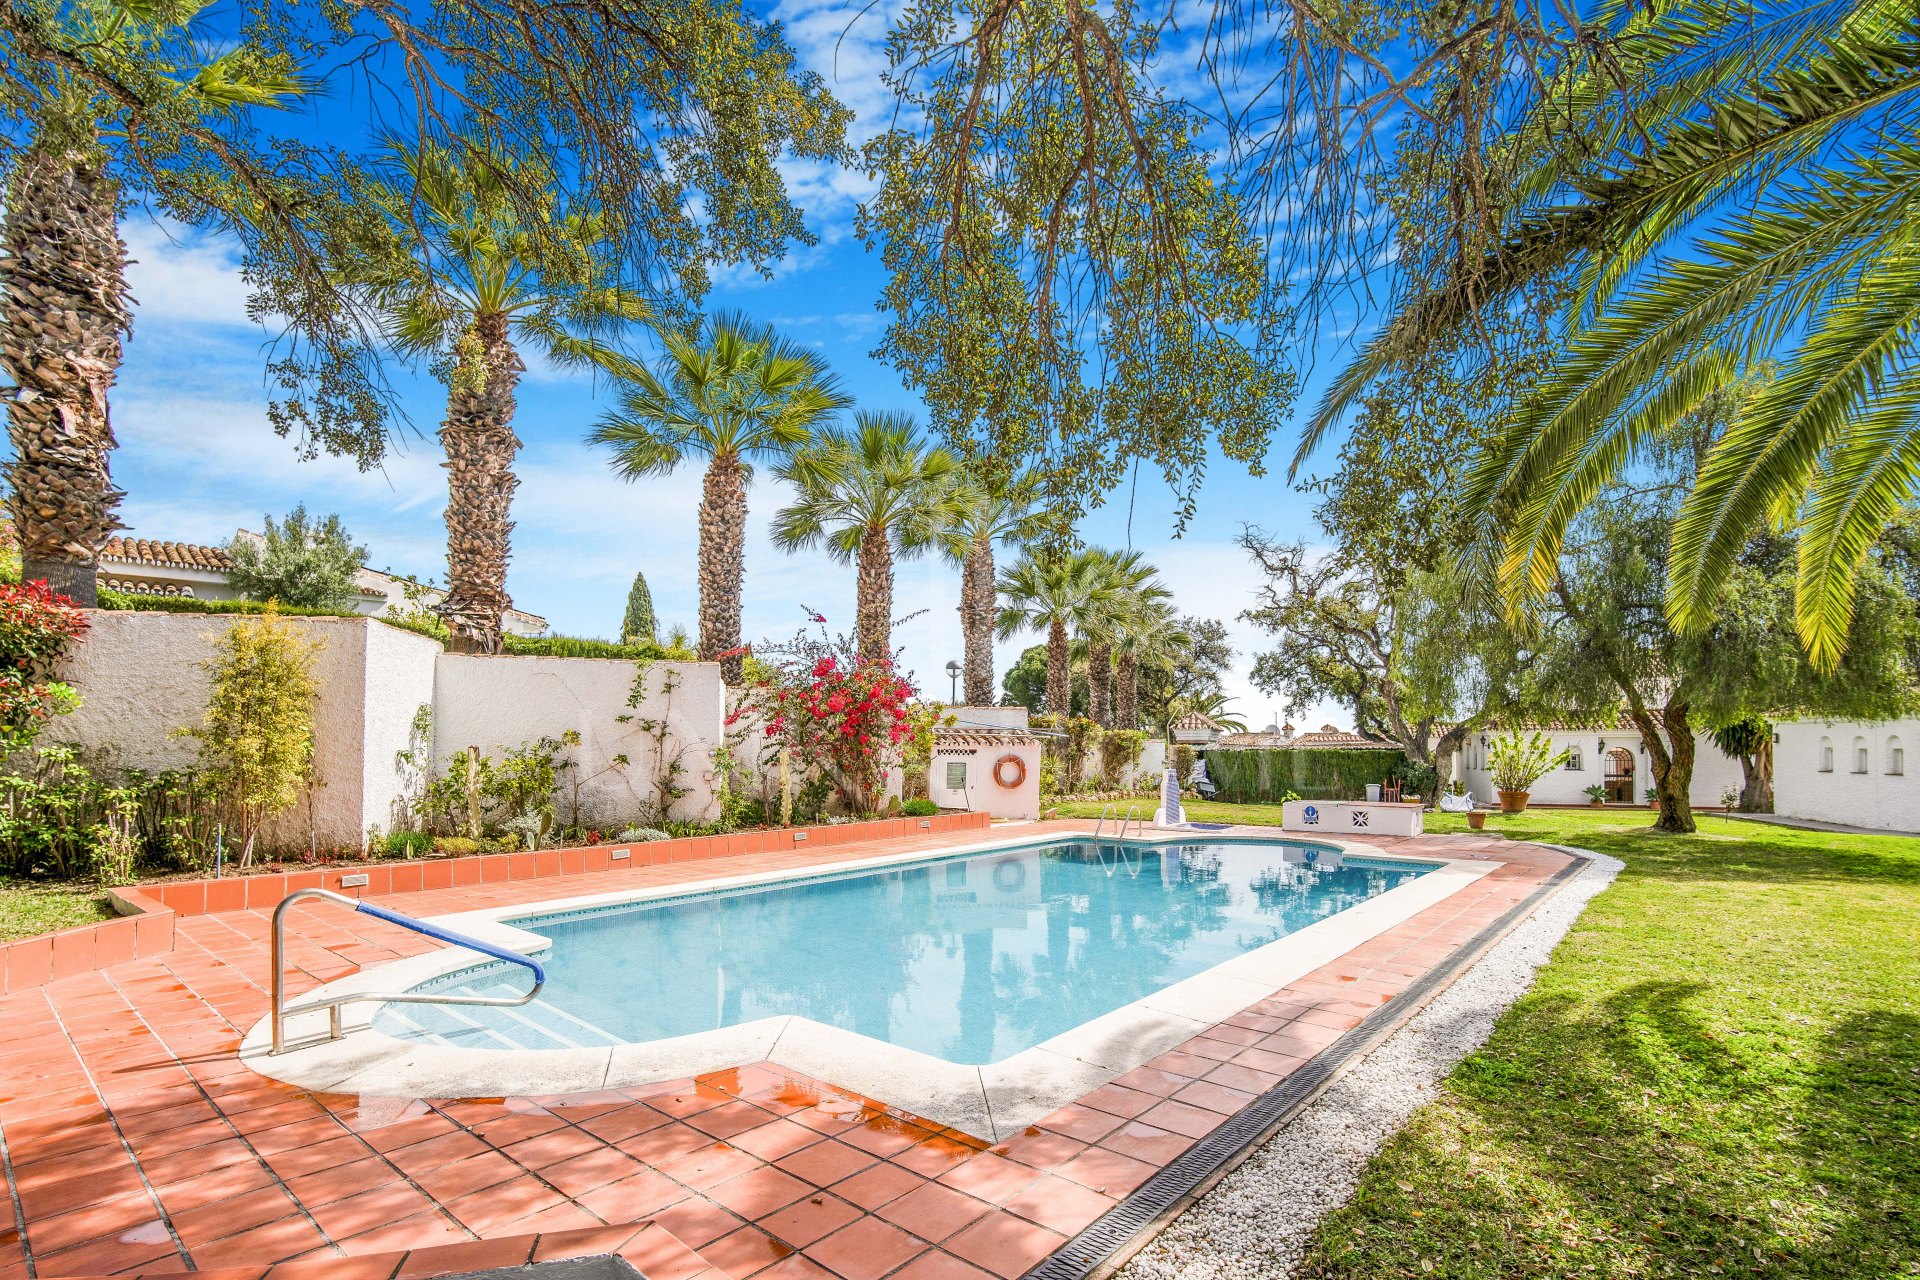 Wonderful four-bedroom villa located within a small gated community of Calahonda, Mijas Costa with guest apartment